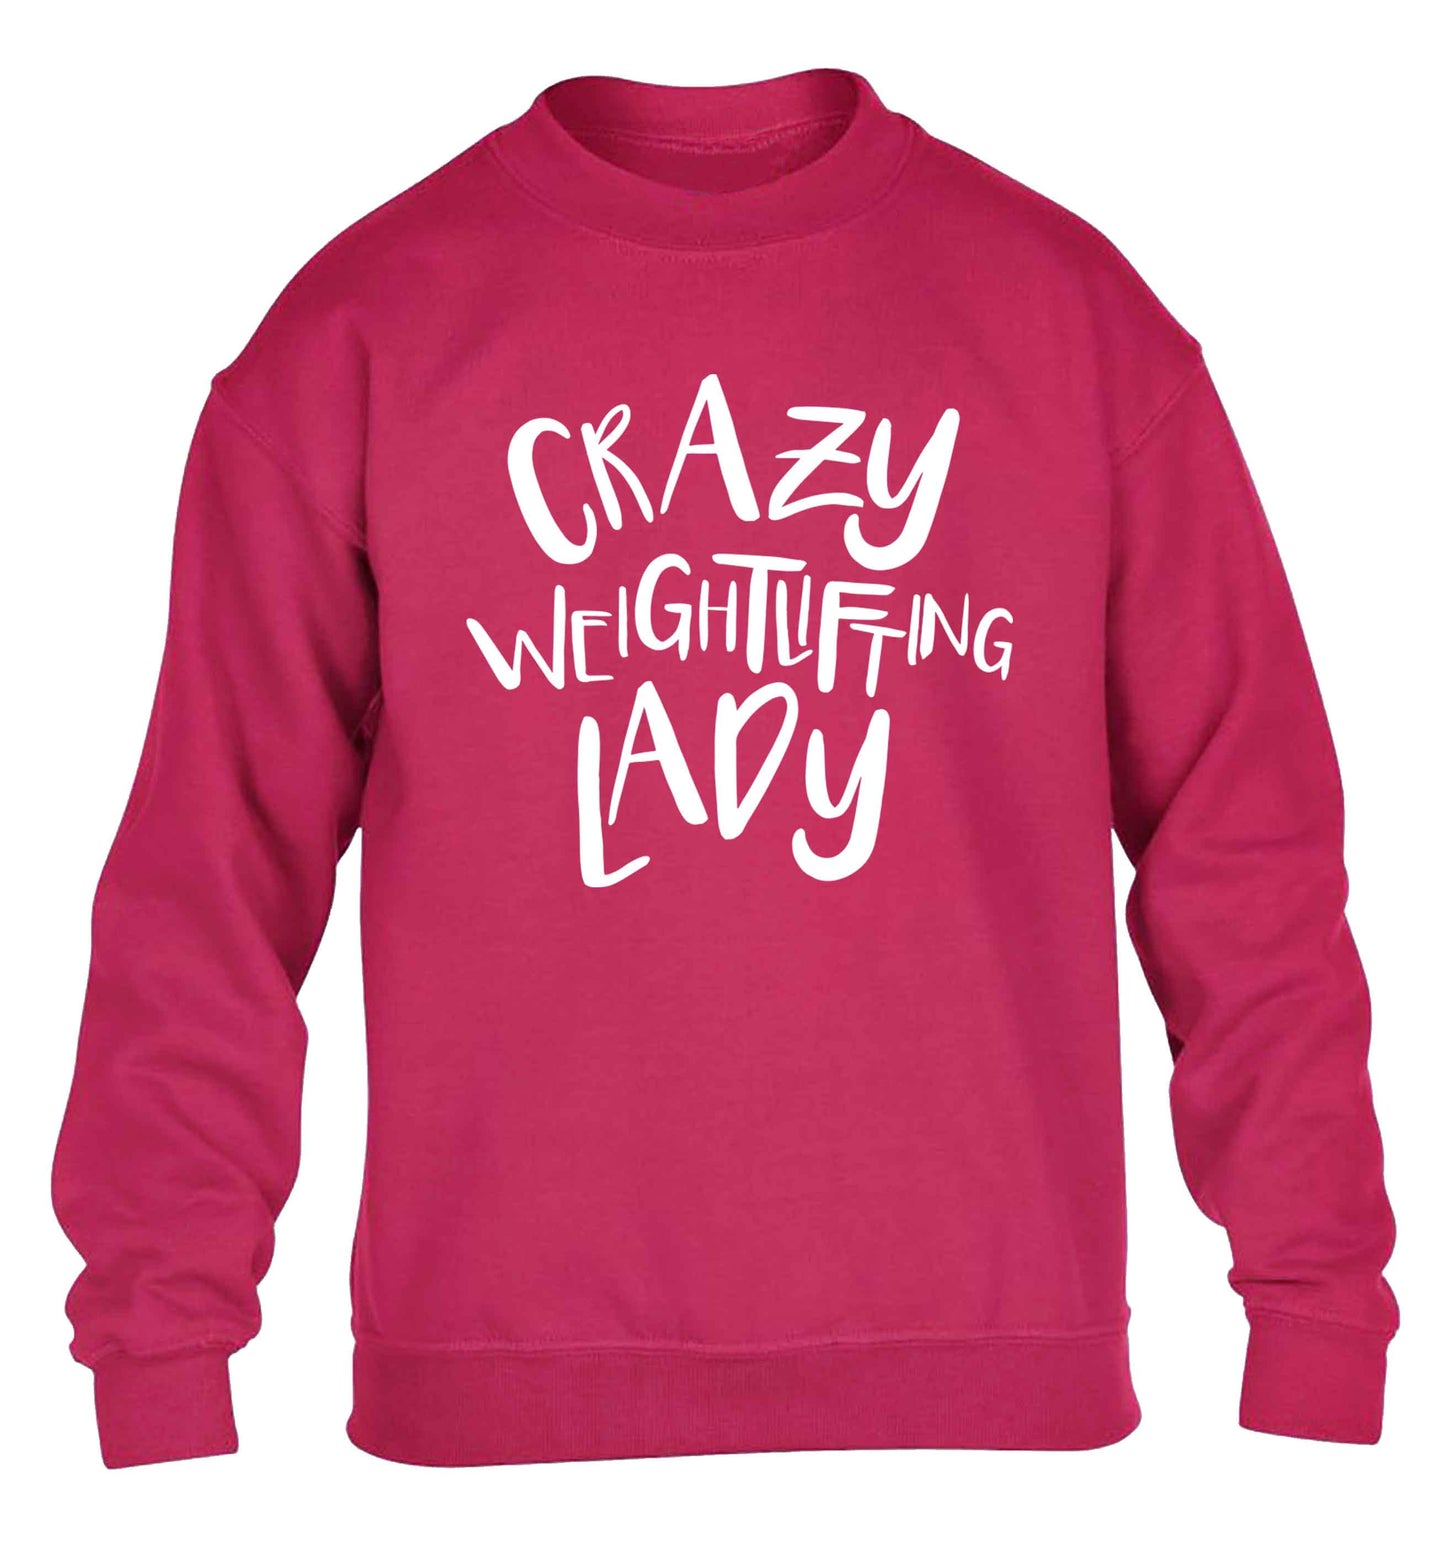 Crazy weightlifting lady children's pink sweater 12-13 Years